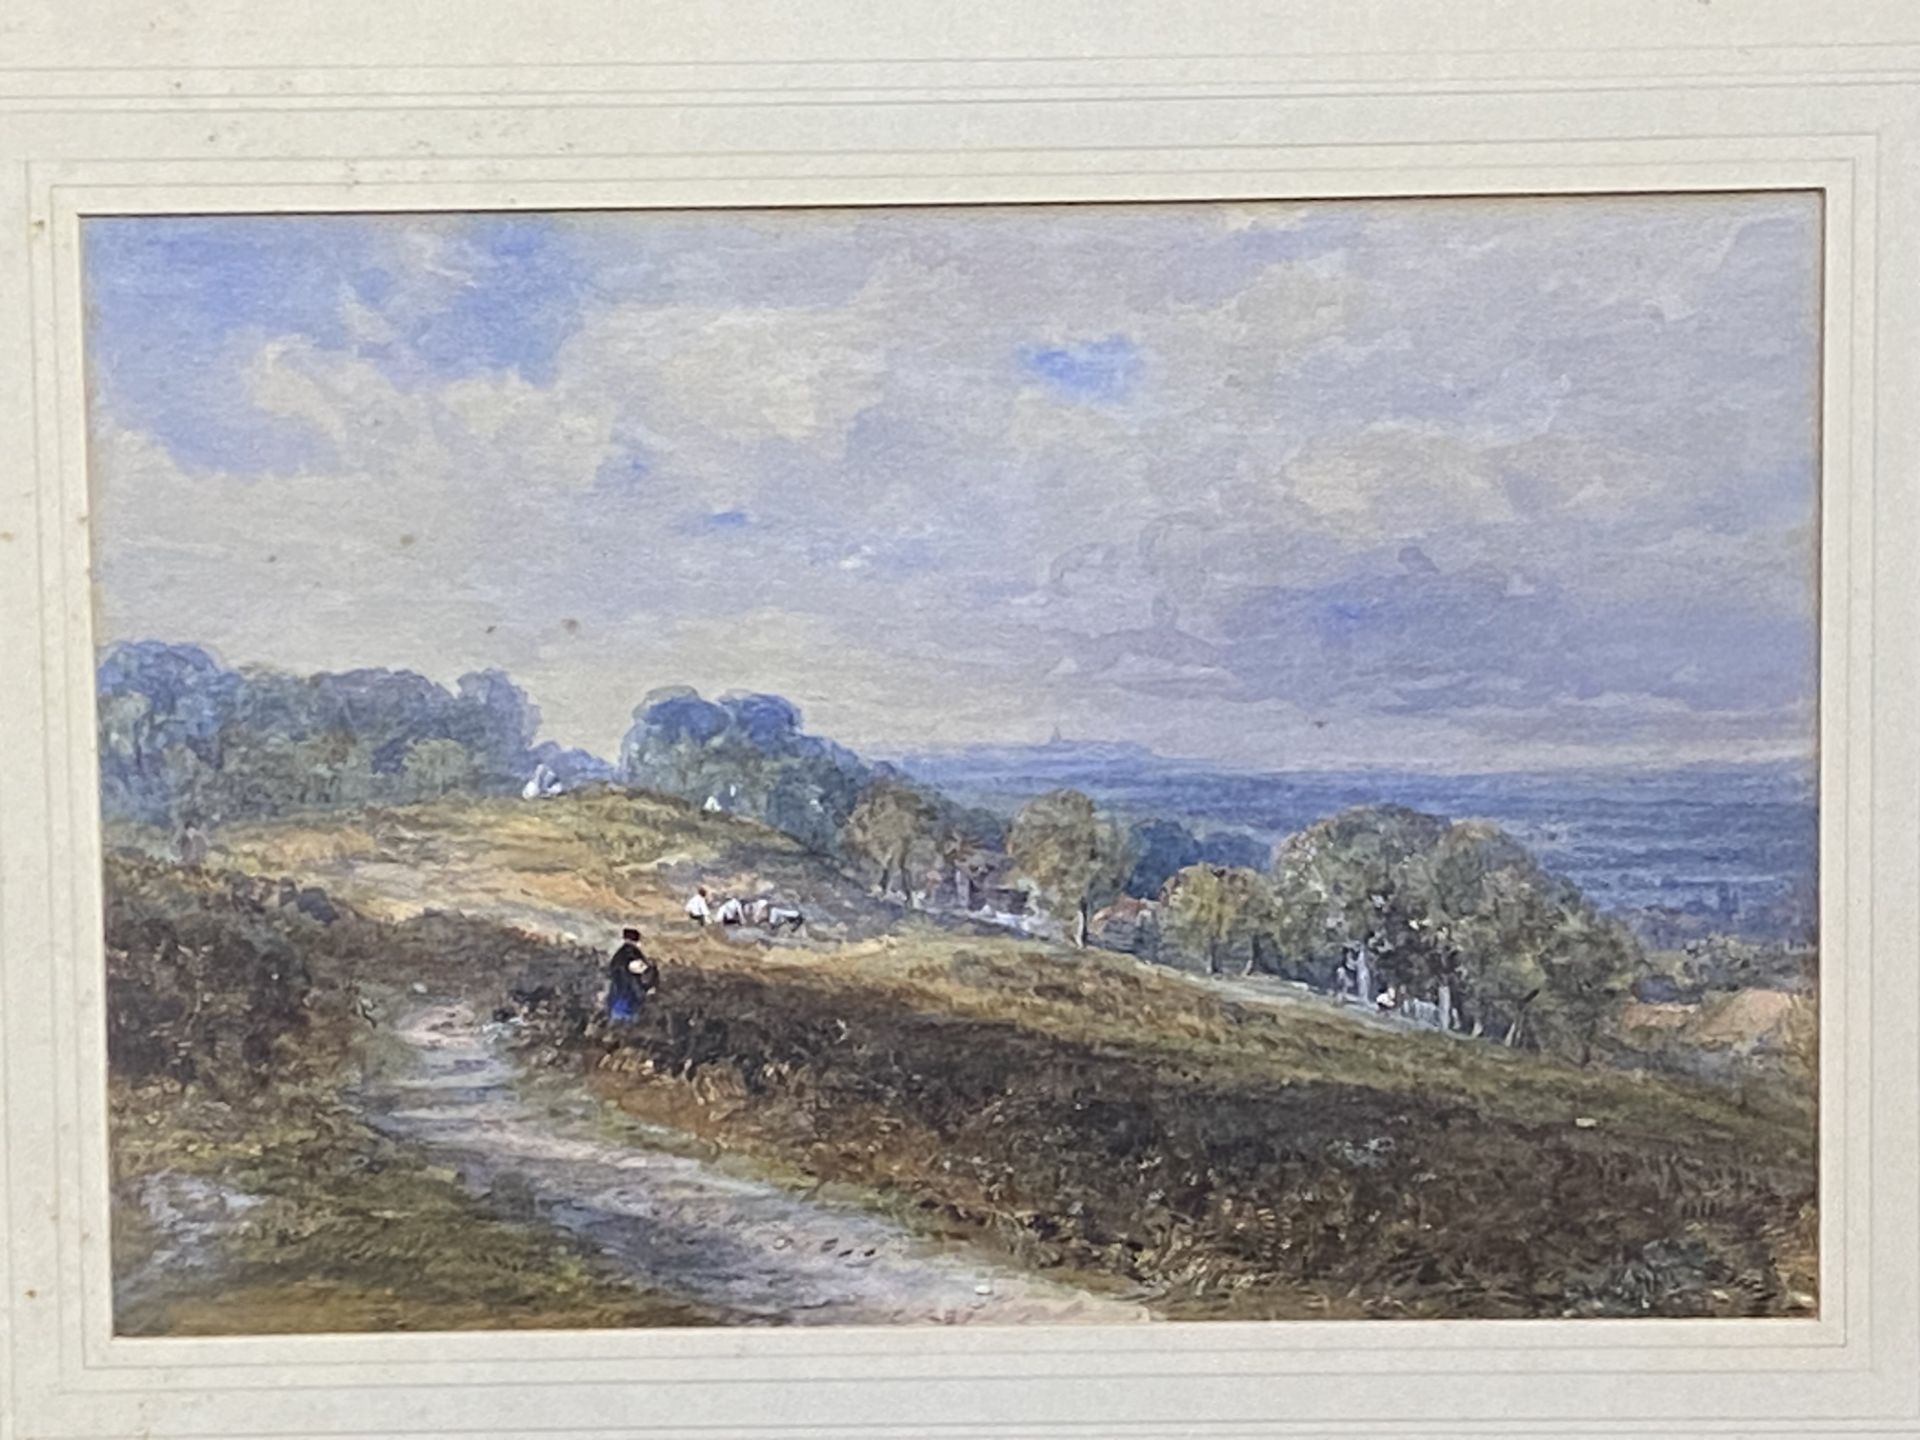 Framed and glazed watercolour "On Hampstead Heath" written to border J Ford - Image 3 of 3